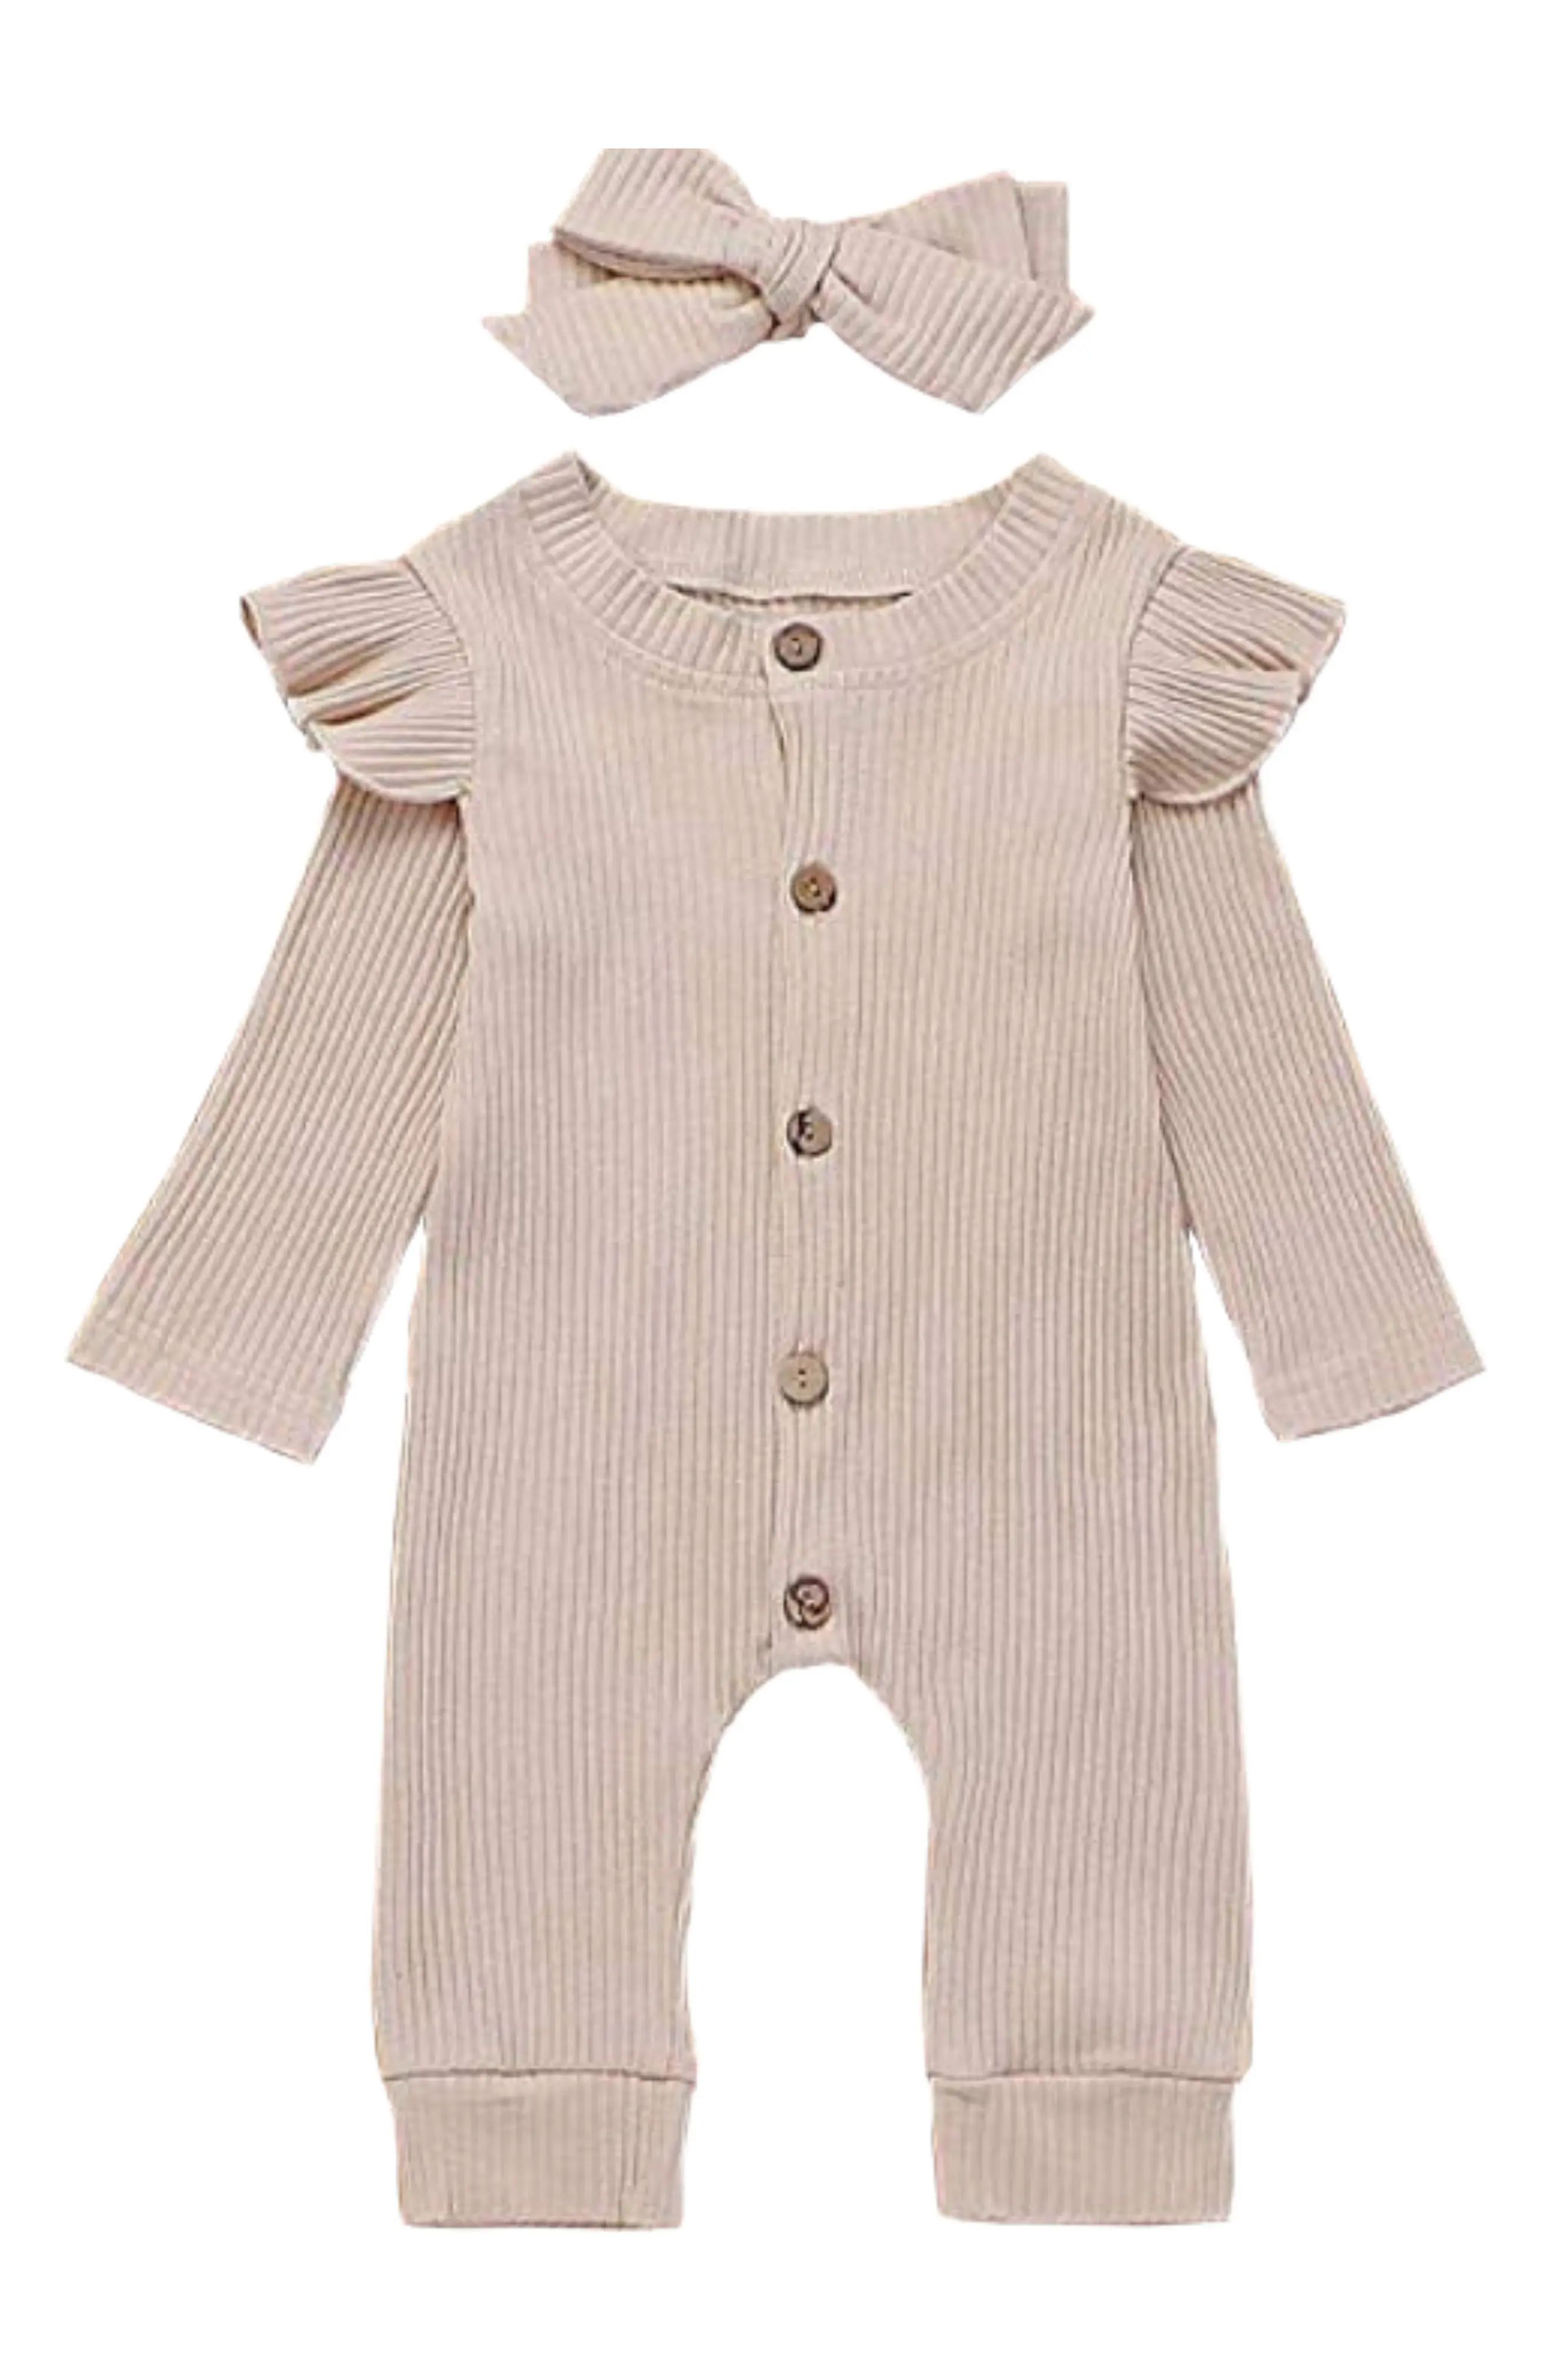 Ashmi & Co. Lilly Ruffle Shoulder Romper & Bow Headband Set in Beige at Nordstrom, Size 18-24M | Nordstrom